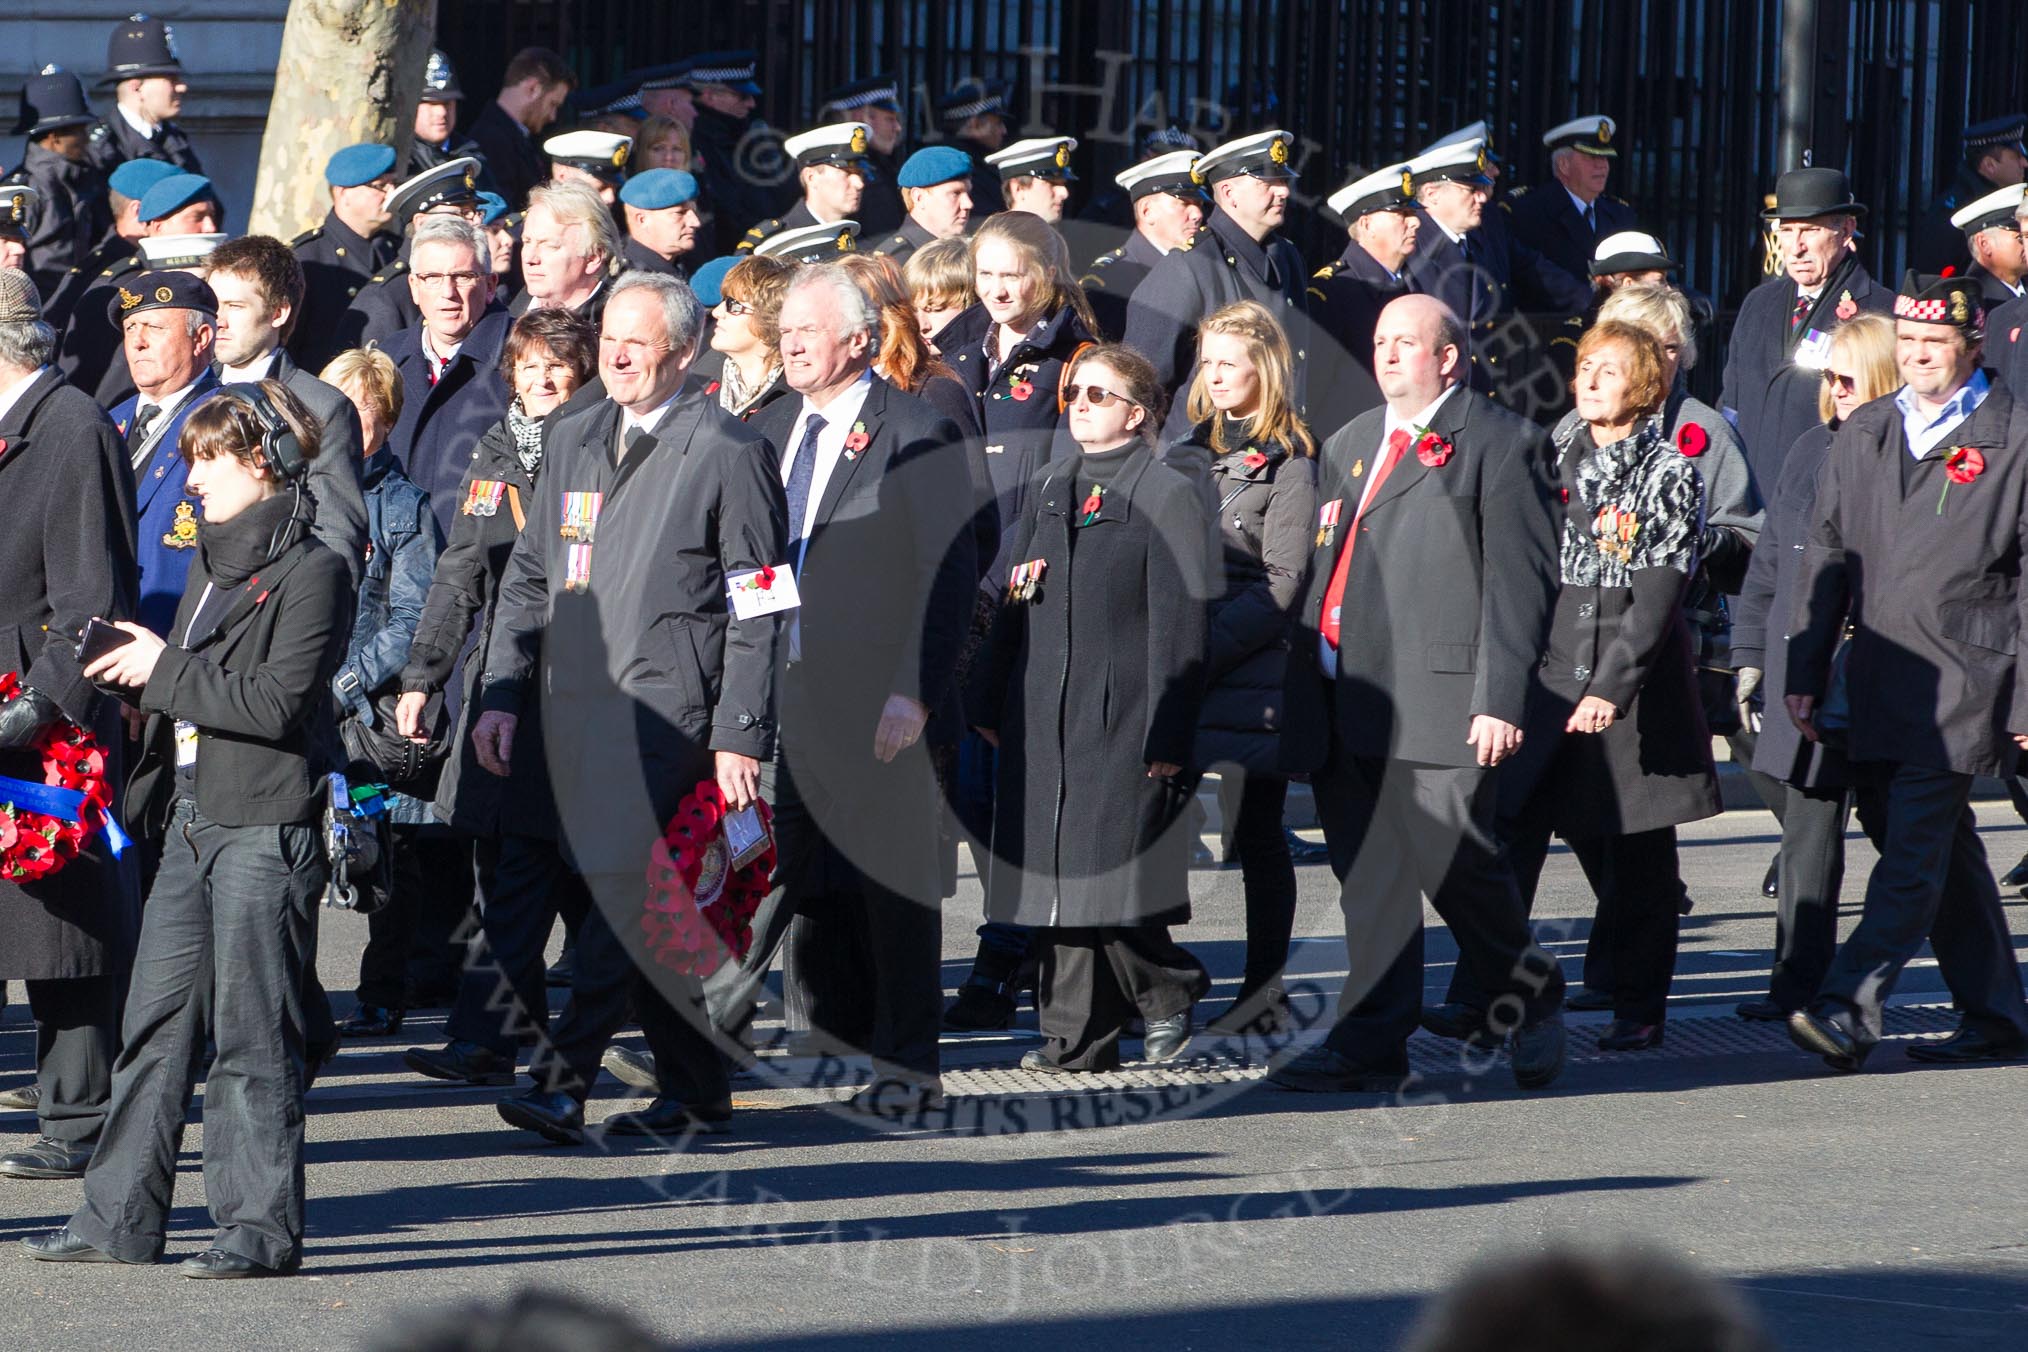 Remembrance Sunday 2012 Cenotaph March Past: Group F4 - Showmens' Guild of Great Britain..
Whitehall, Cenotaph,
London SW1,

United Kingdom,
on 11 November 2012 at 11:45, image #407